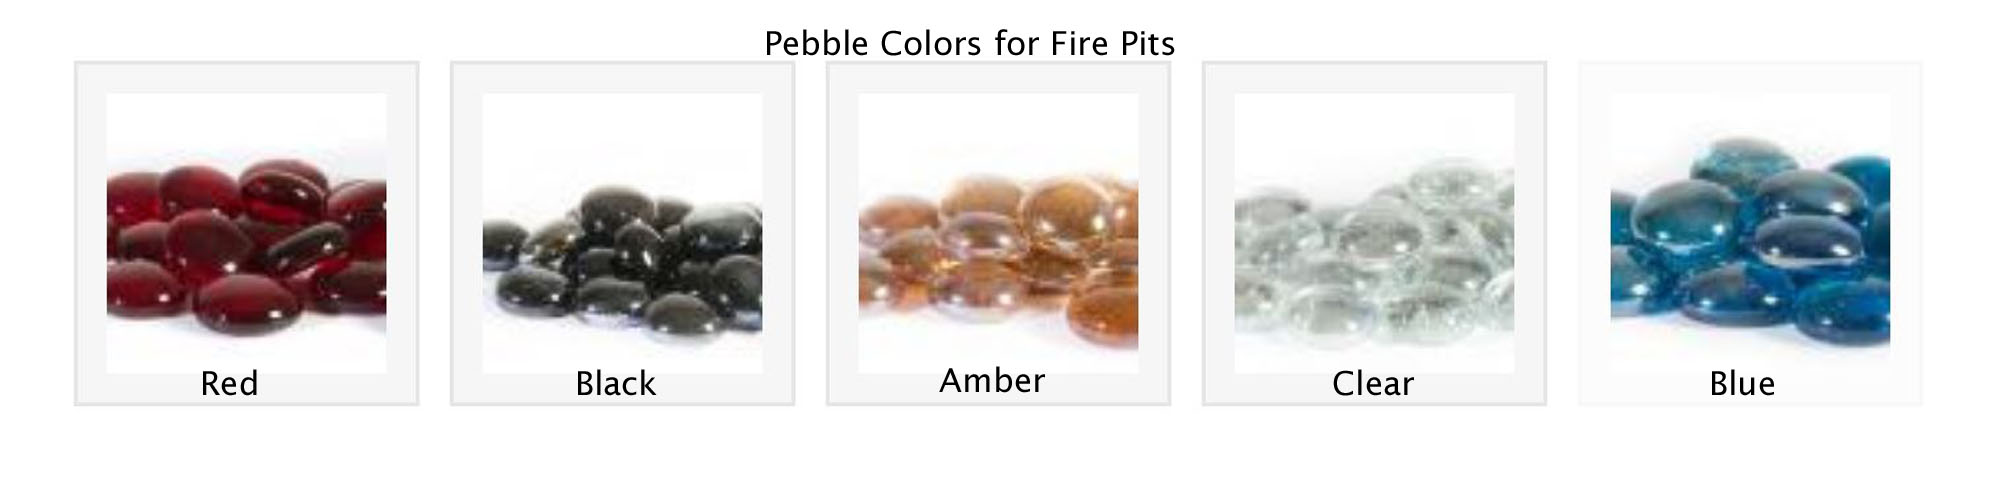 Fire Pit Color Chart Stones by American Recycled Plastic